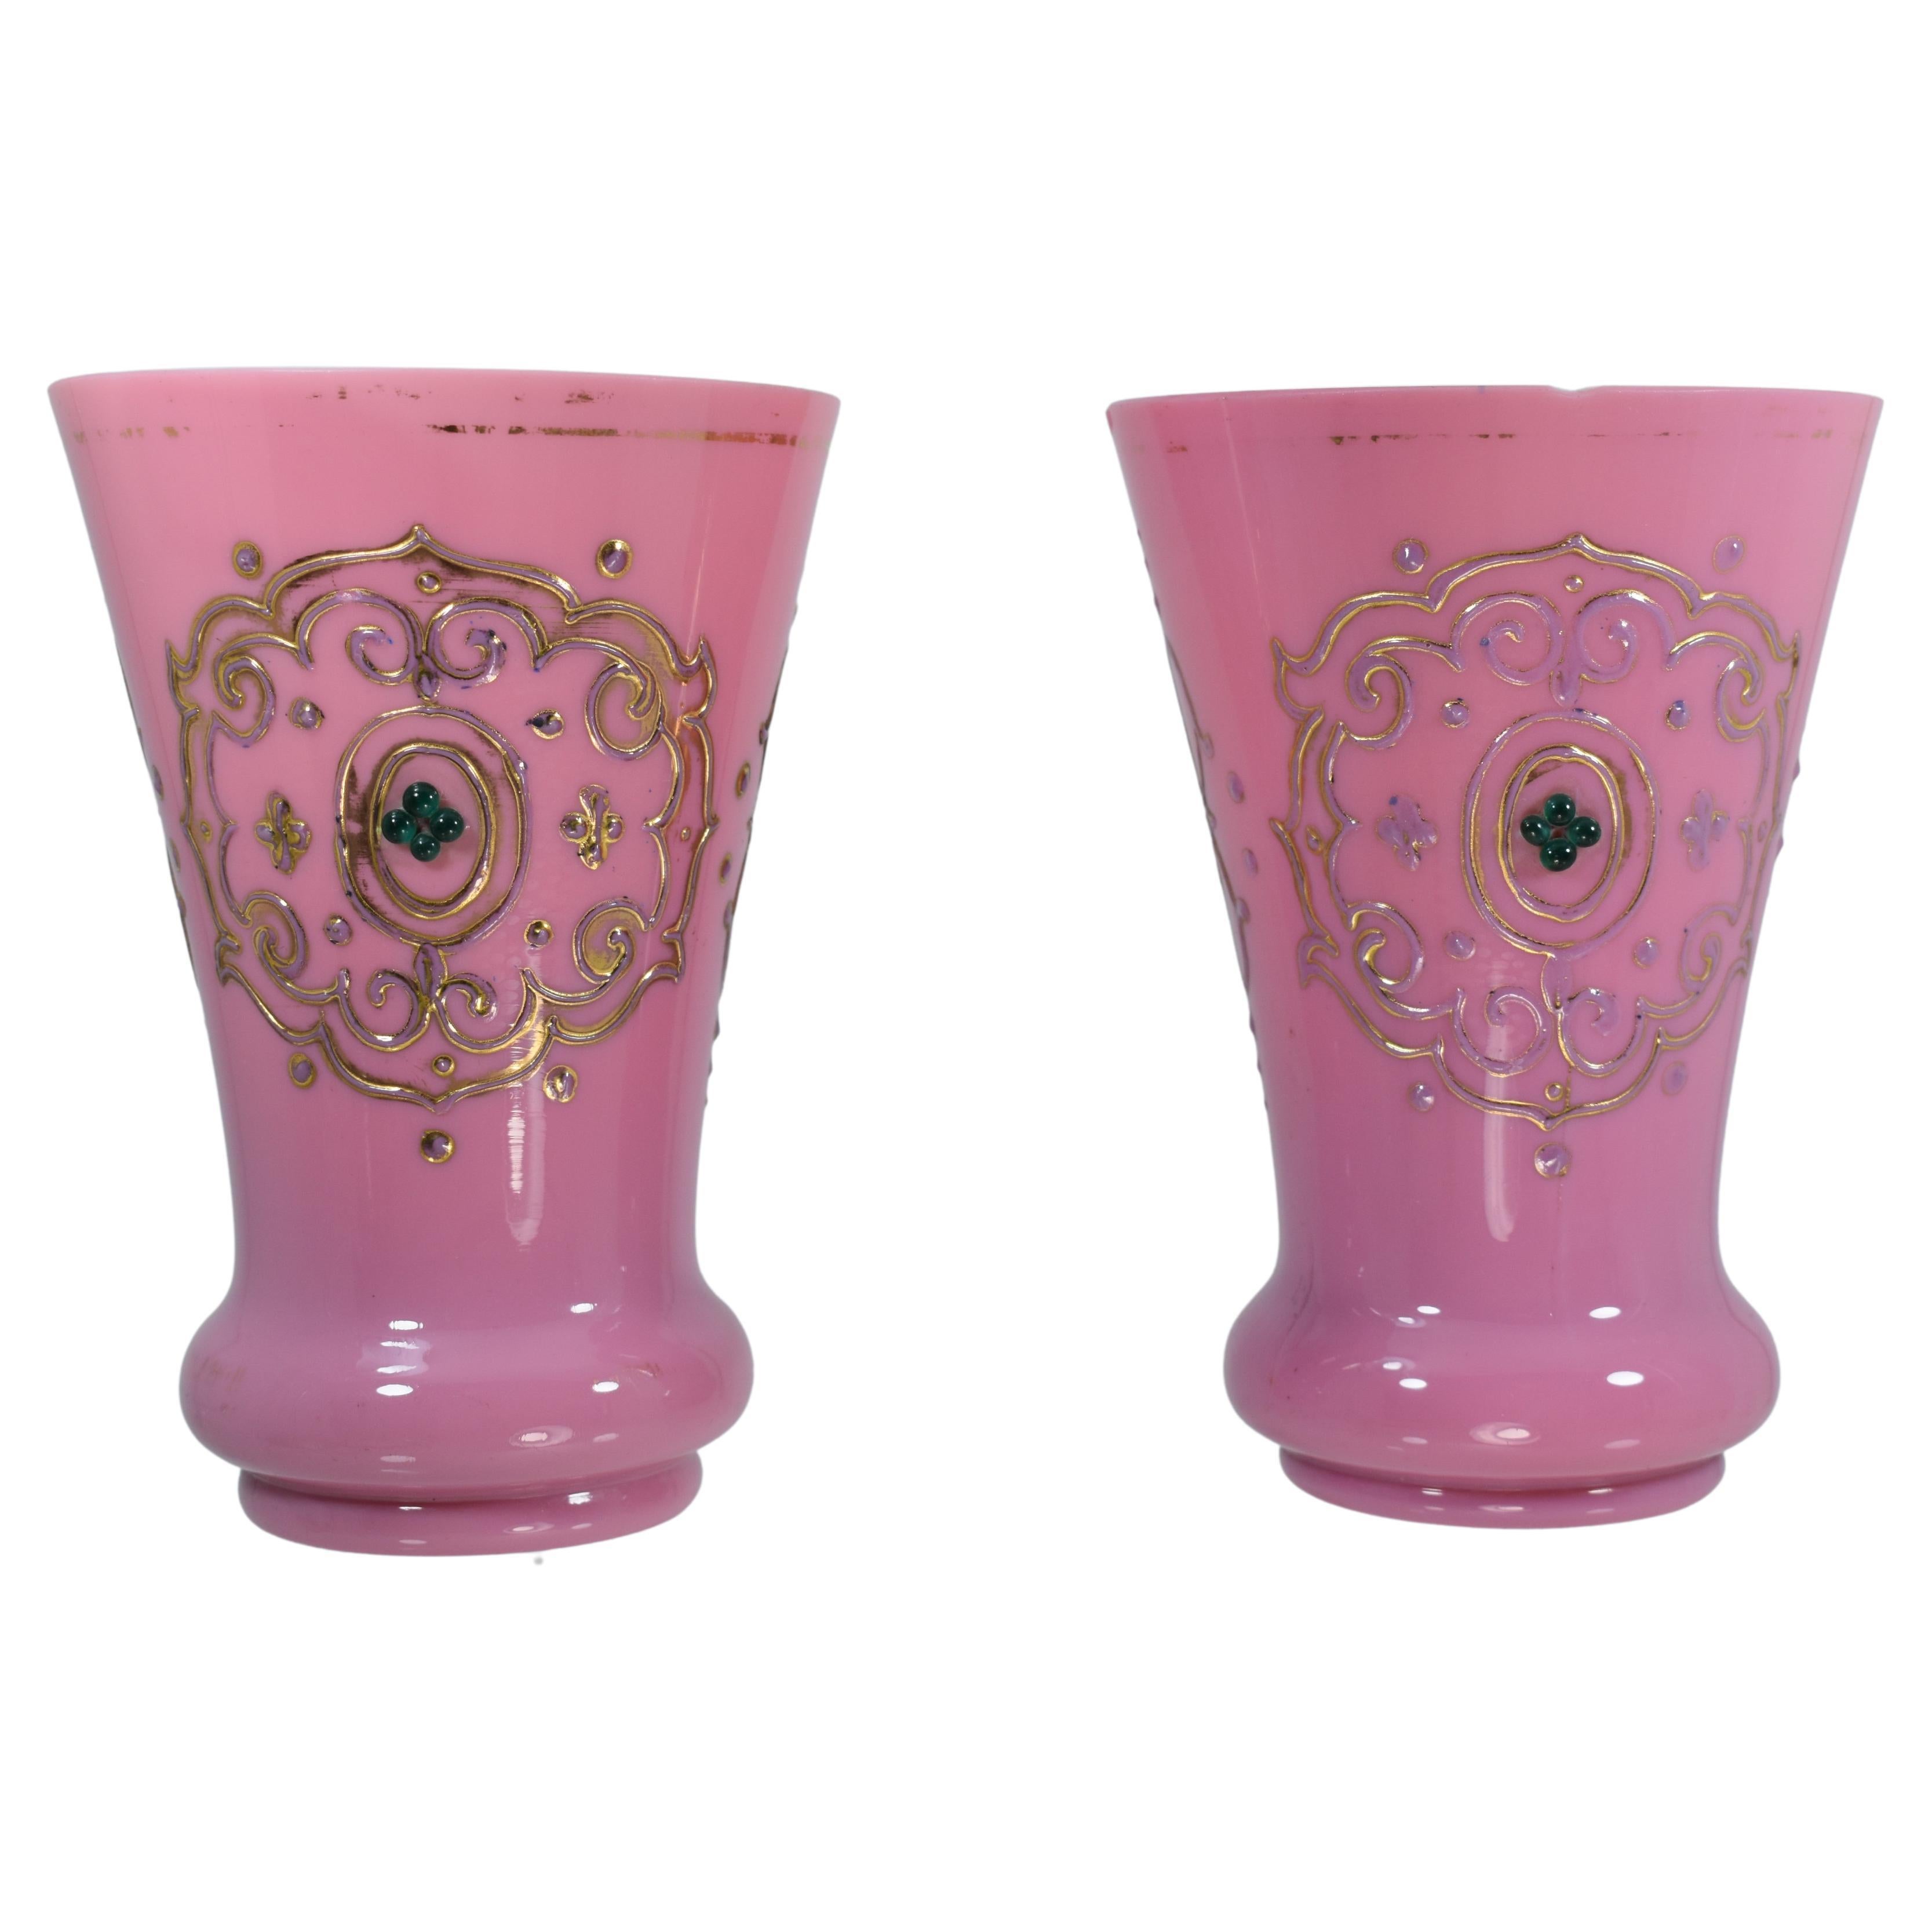 Pair of Pink Opaline Enamelled Glass Cups, made for Islamic Market 19th Century